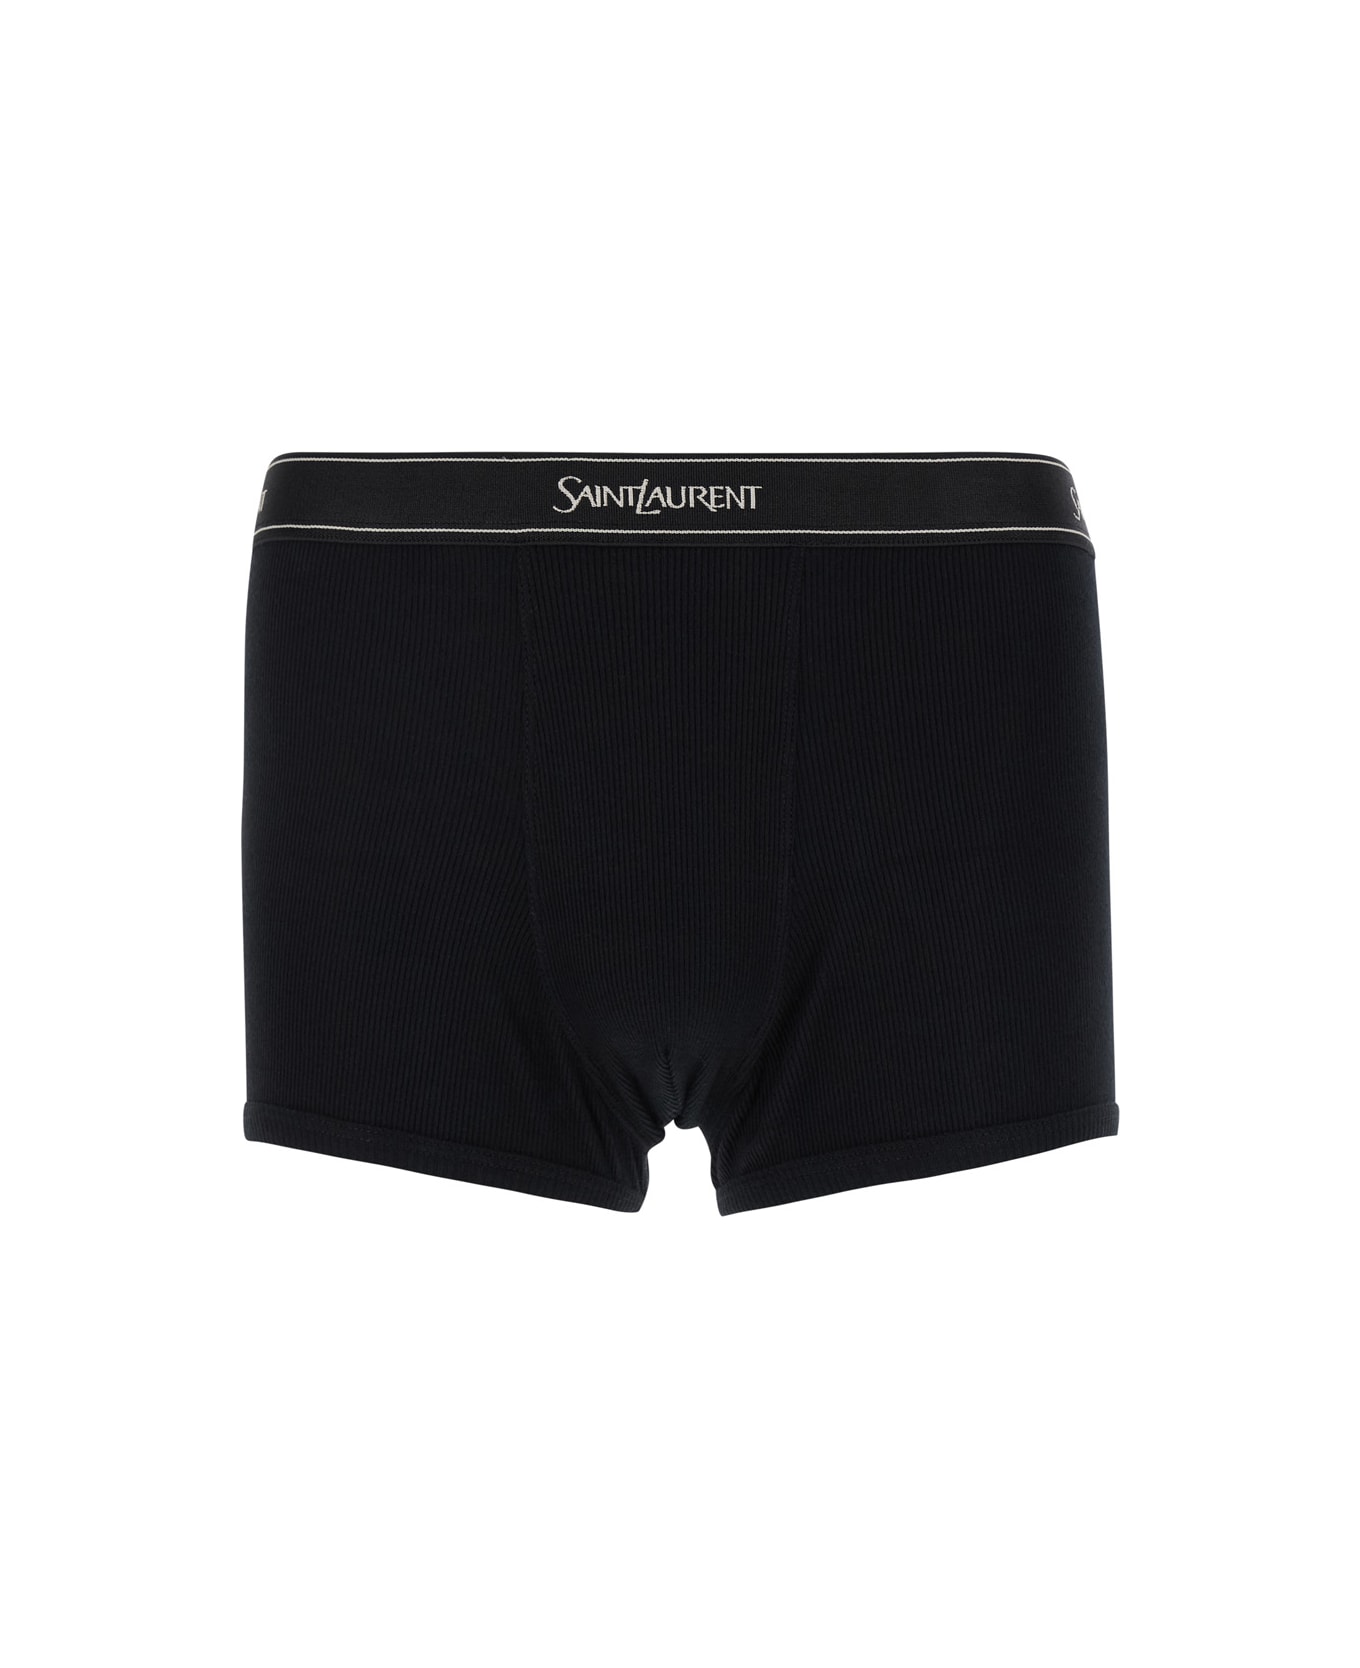 Saint Laurent Black Boxer Briefs With Logo Lettering Embroidery In Ribbed Cotton Man - Black